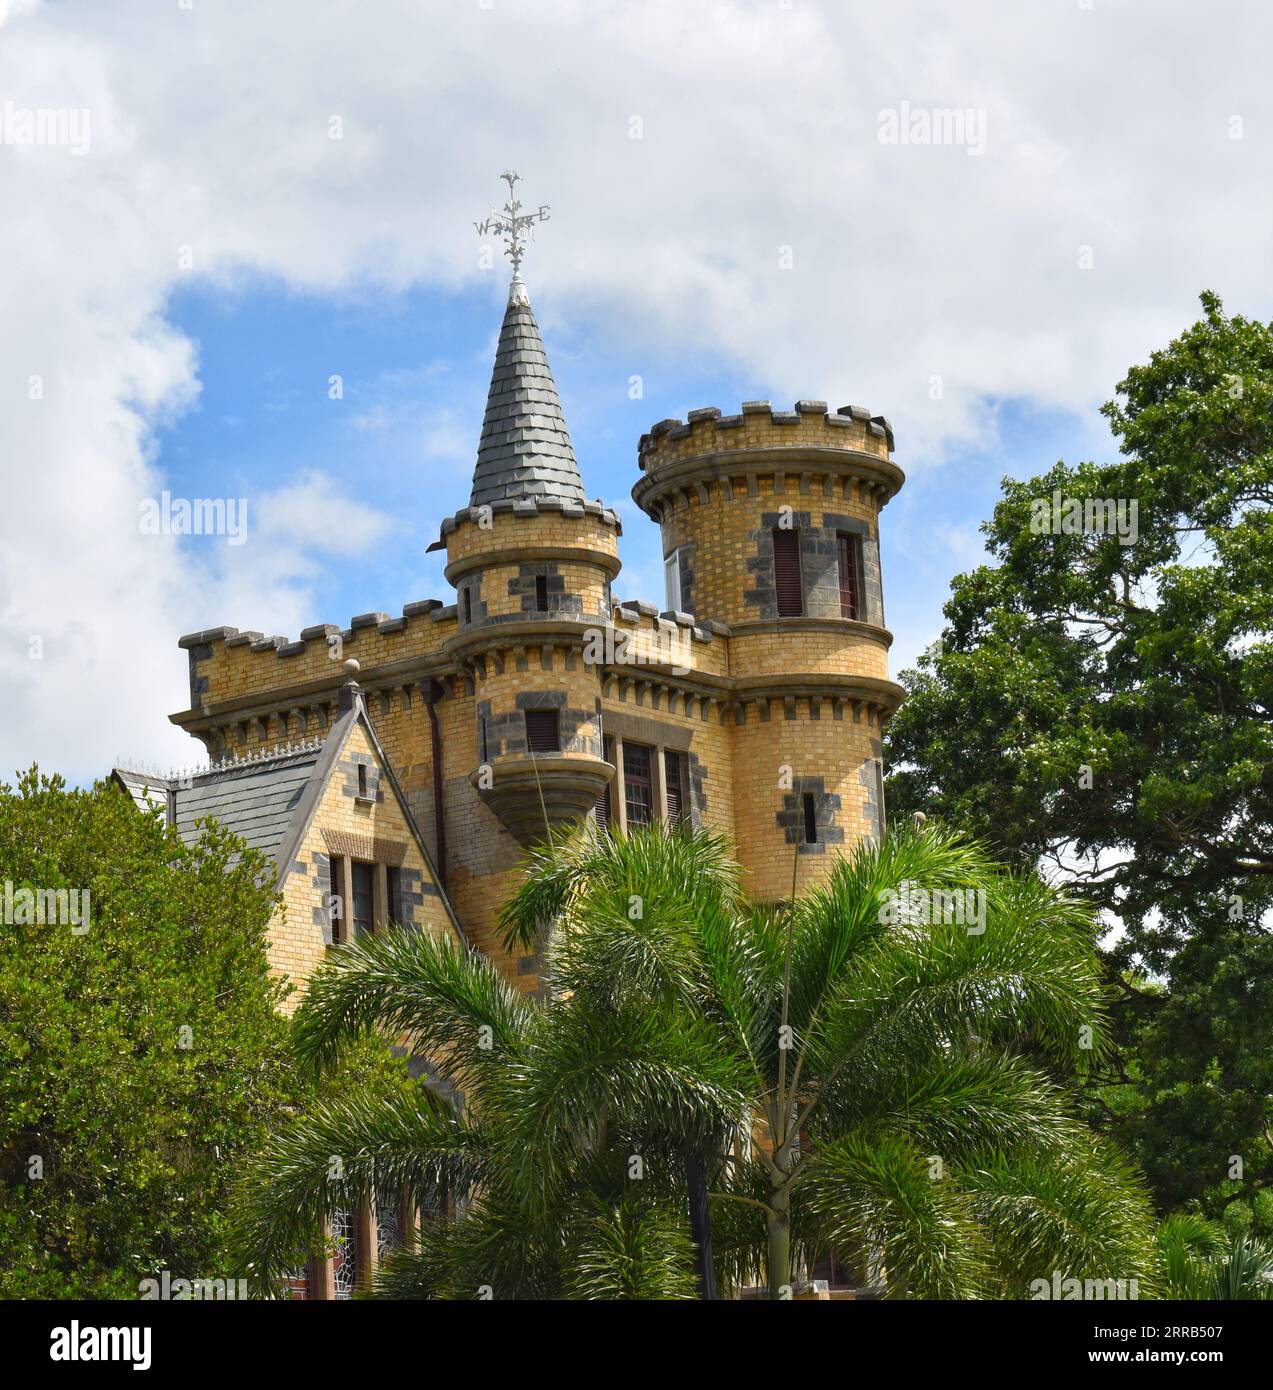 The Stollmeyer’s Castle or Killarney in Port of Spain, Trinidad and Tobago. It is one of the magnificent seven buildings. Stock Photo